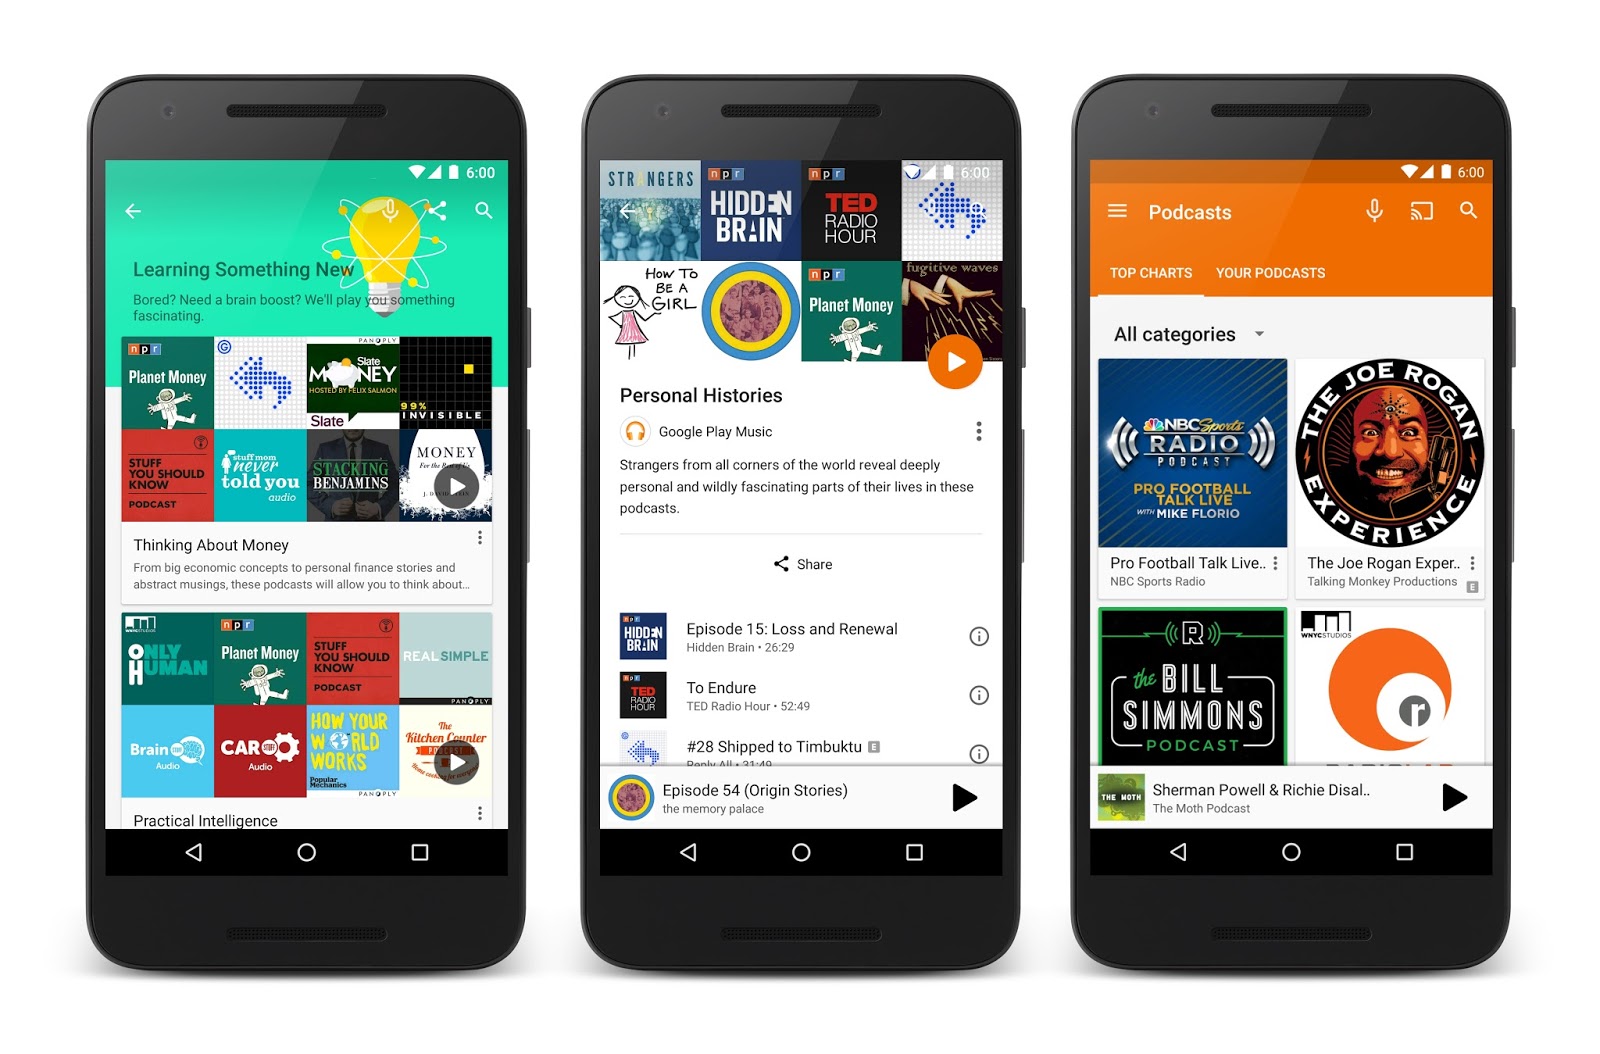 Welcome to Google Play Music, the podcast episode